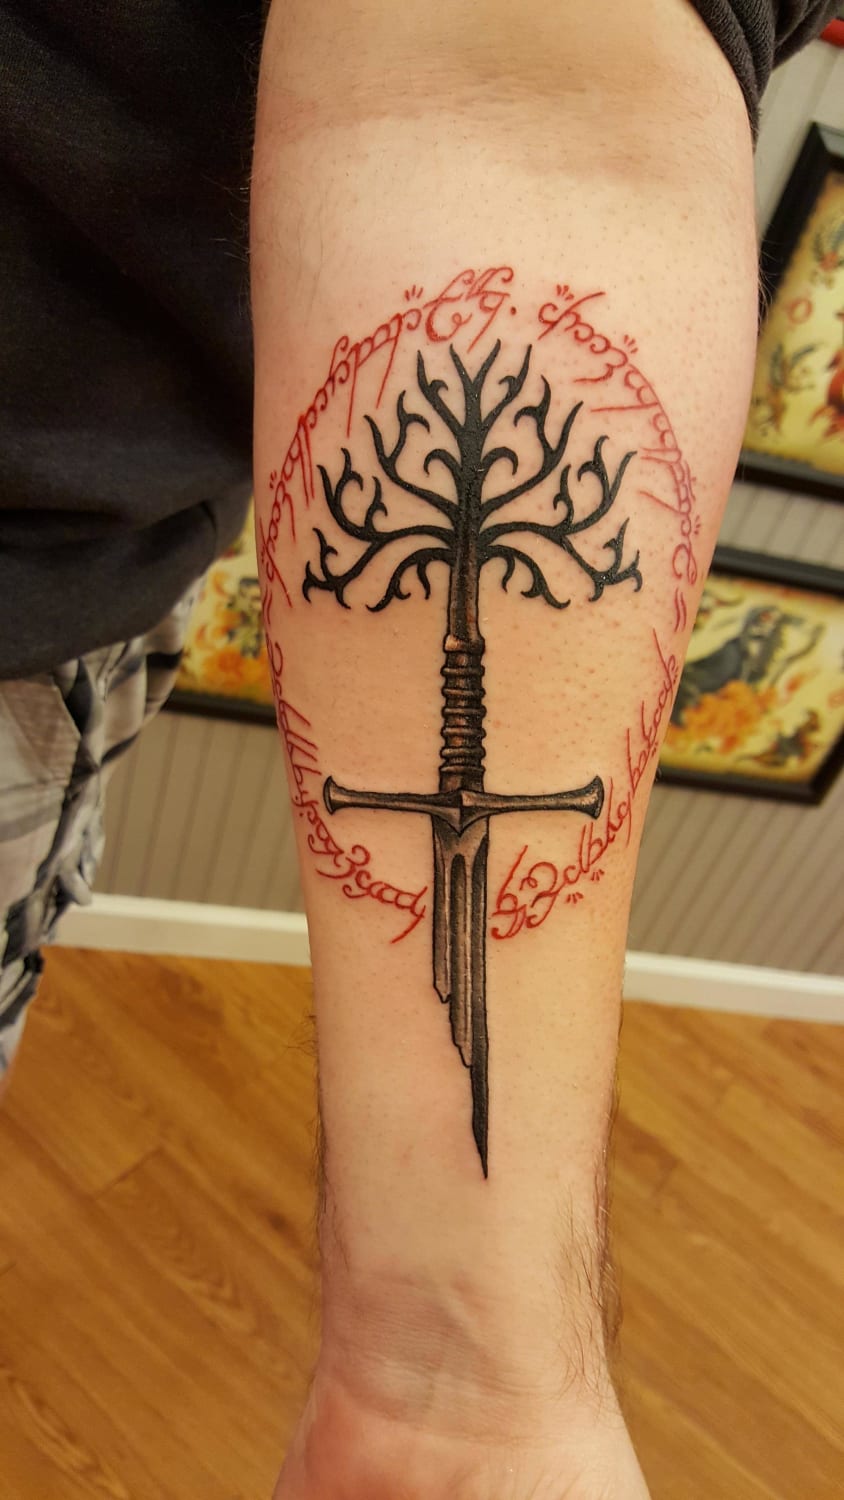 Lord of the Rings Tattoo, by Derek @ Big Hot Olive Tattoo, Pleasant Hall, PA/r/all